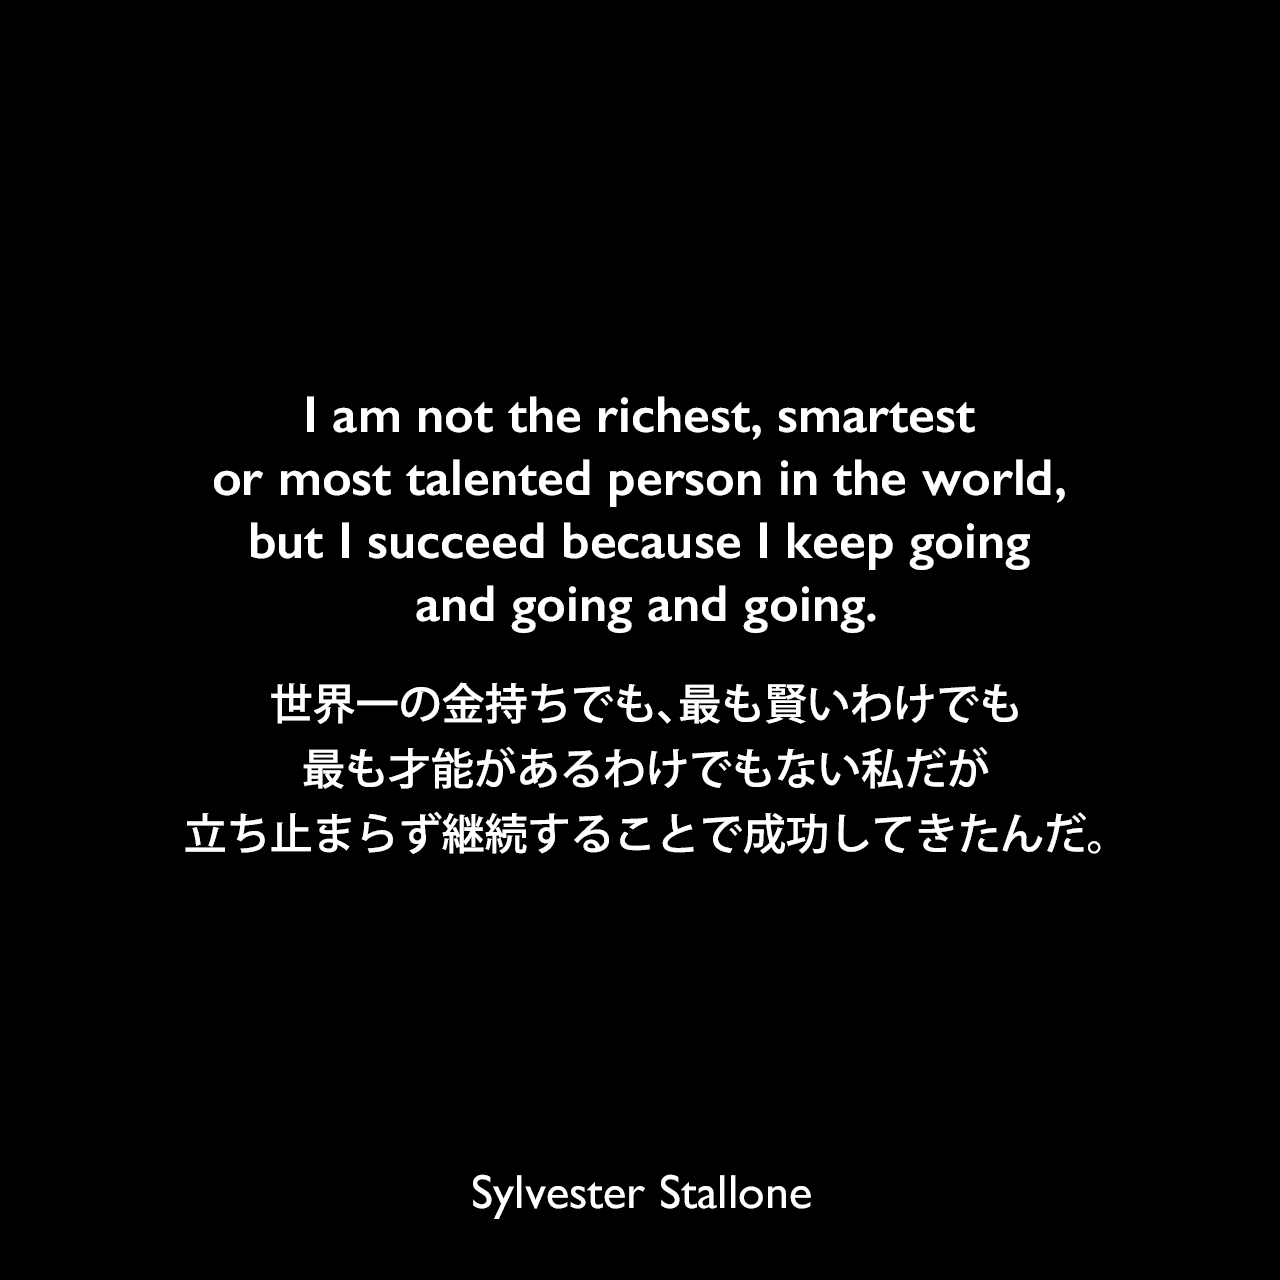 I am not the richest, smartest or most talented person in the world, but I succeed because I keep going and going and going.世界一の金持ちでも、最も賢いわけでも、最も才能があるわけでもない私だが、立ち止まらず継続することで成功してきたんだ。Sylvester Stallone